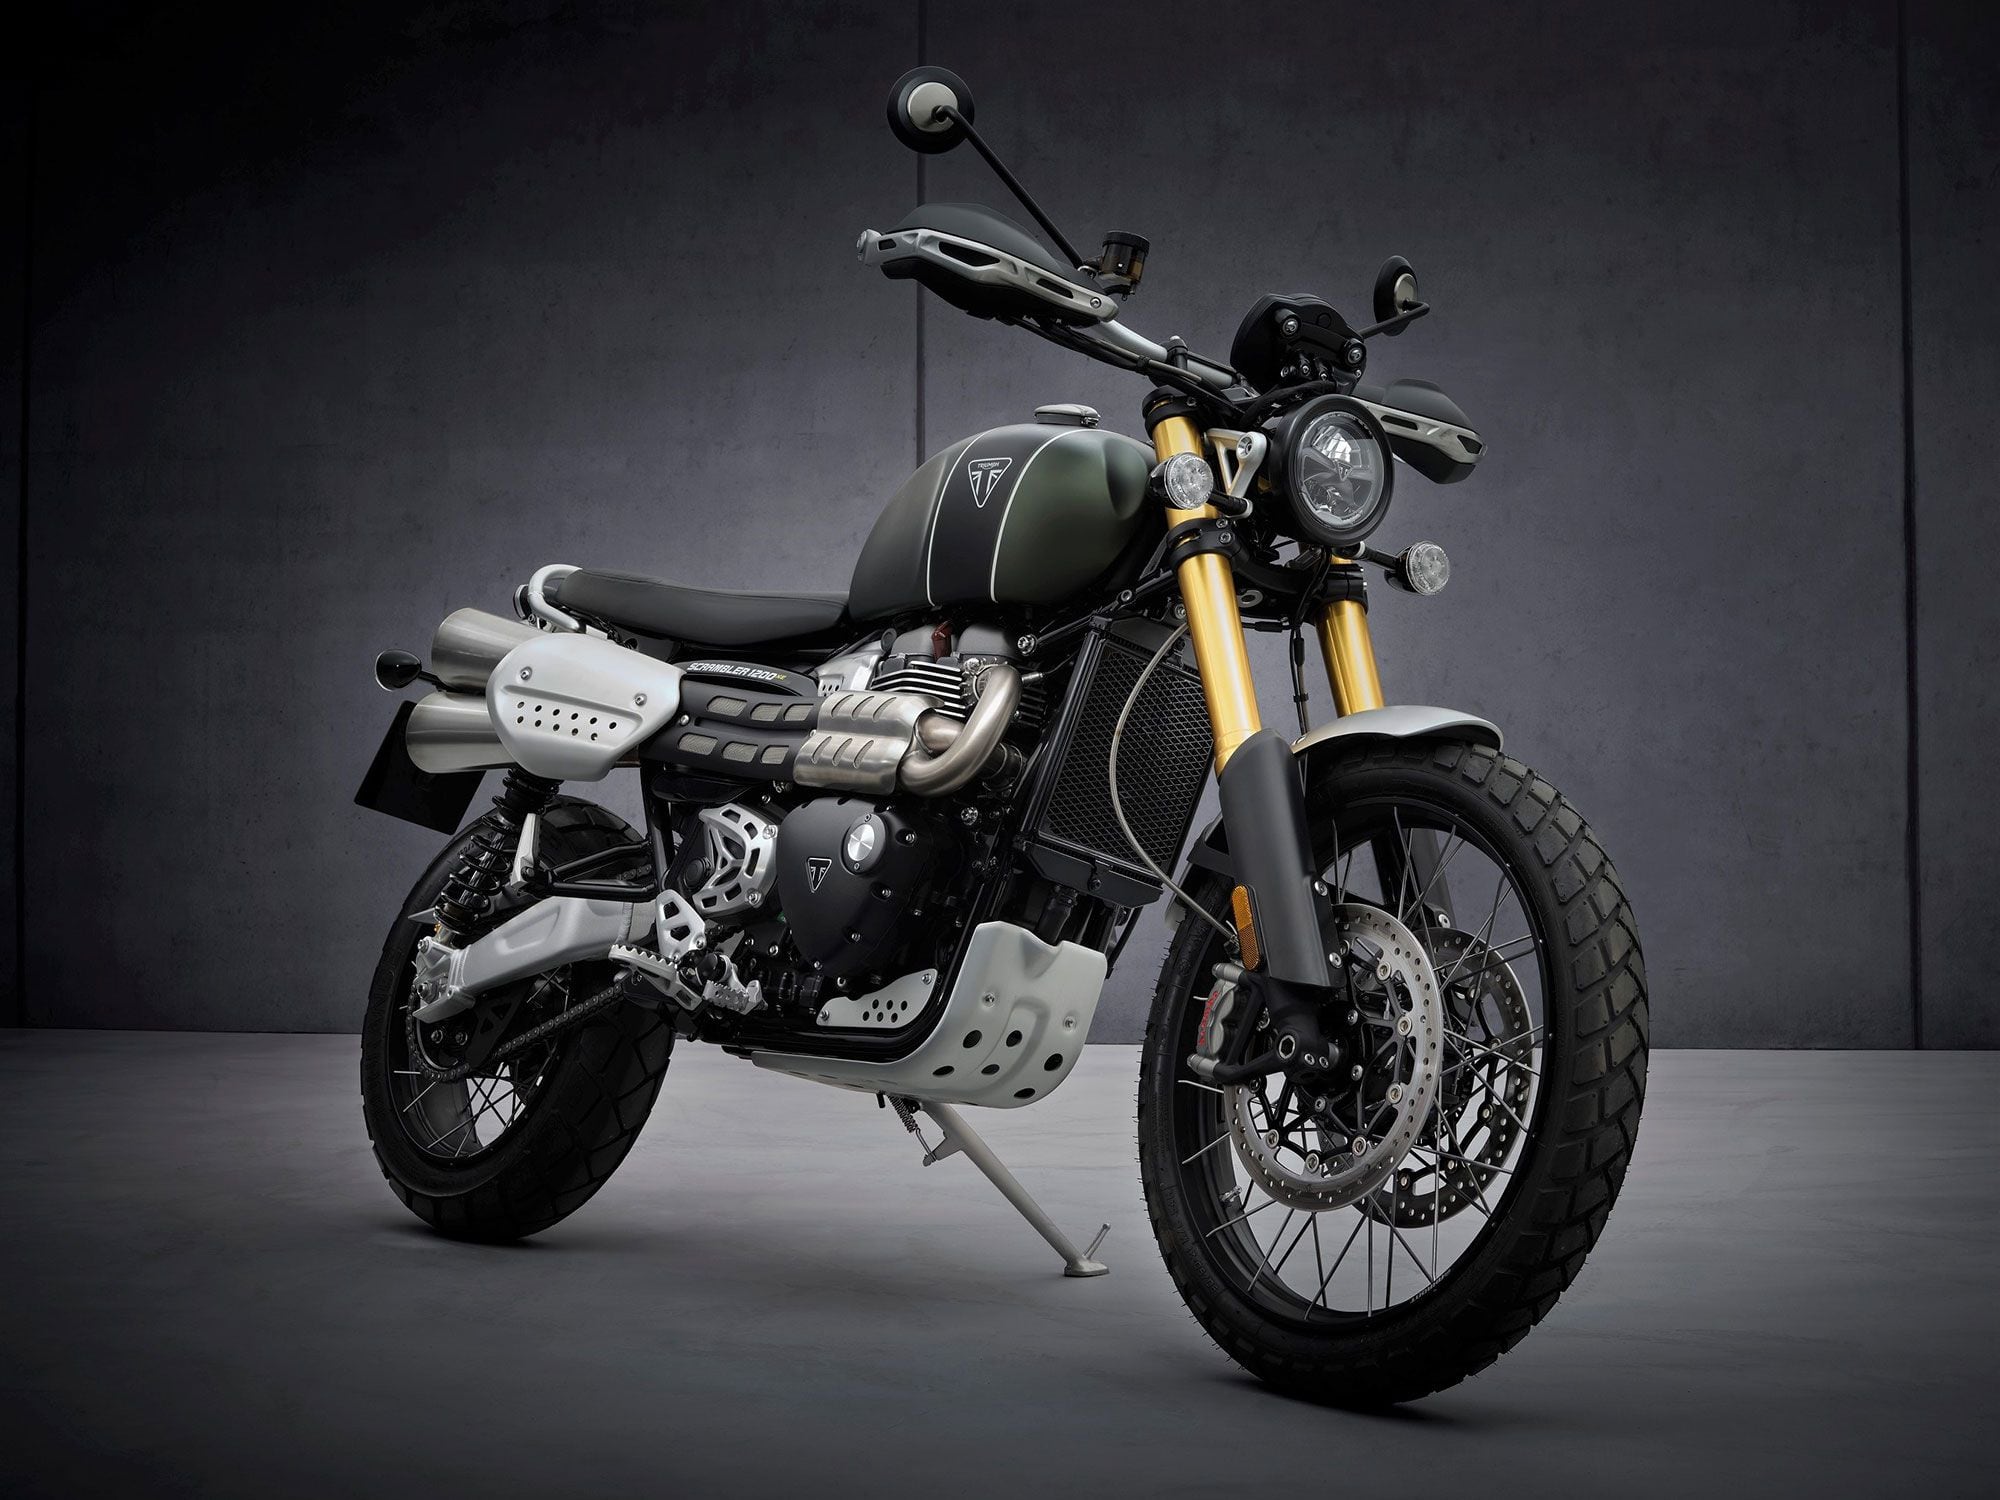 The 2022 Scrambler 1200 XE ups the spec level with longer-travel suspension, additional ride modes, and a higher price tag than the XC.